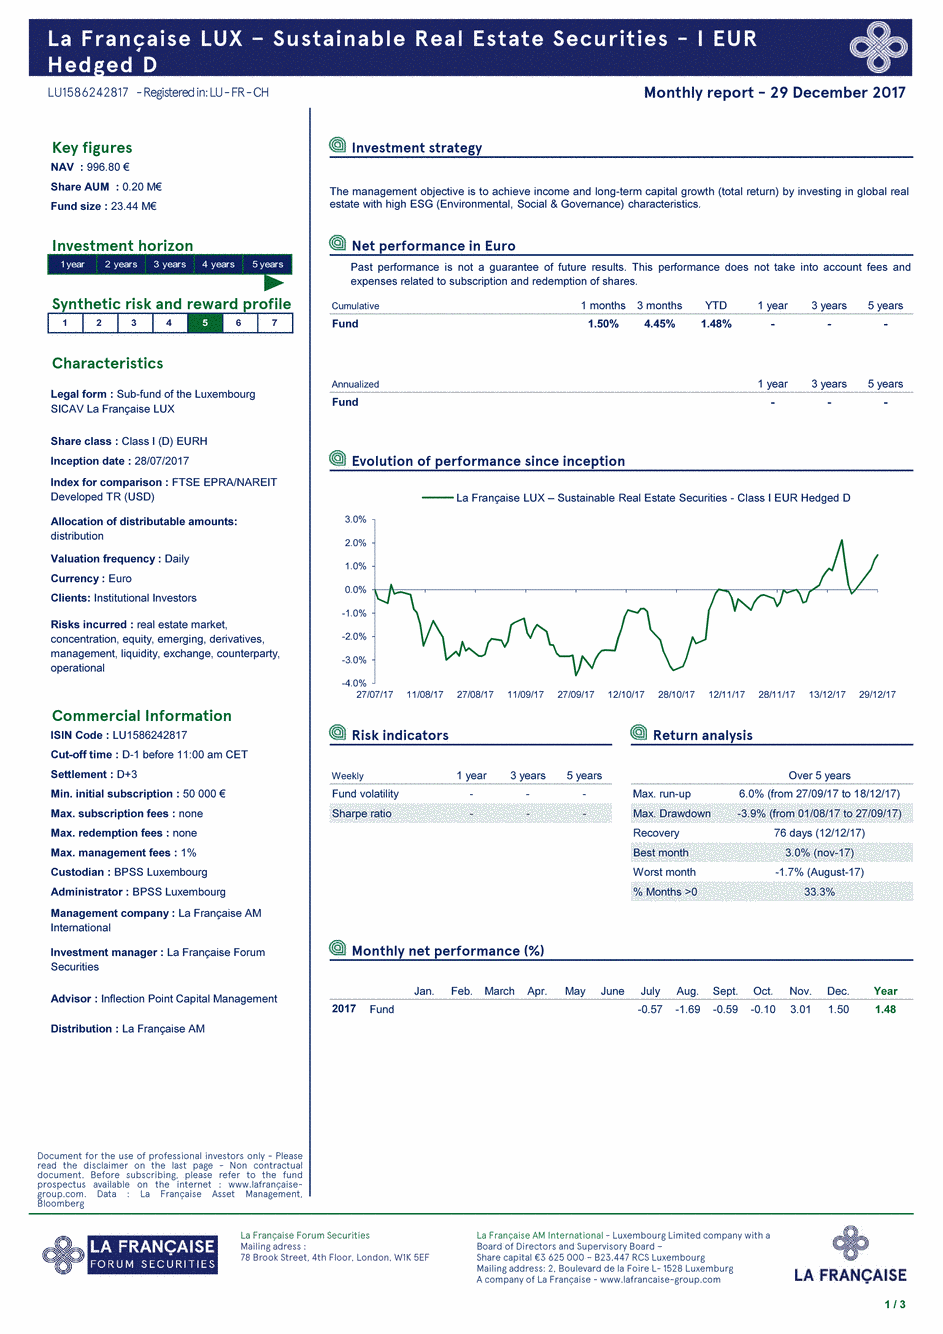 Reporting La Française LUX - Sustainable Real Estate Securities - Class I EUR Hedged D - 31/12/2017 - Anglais